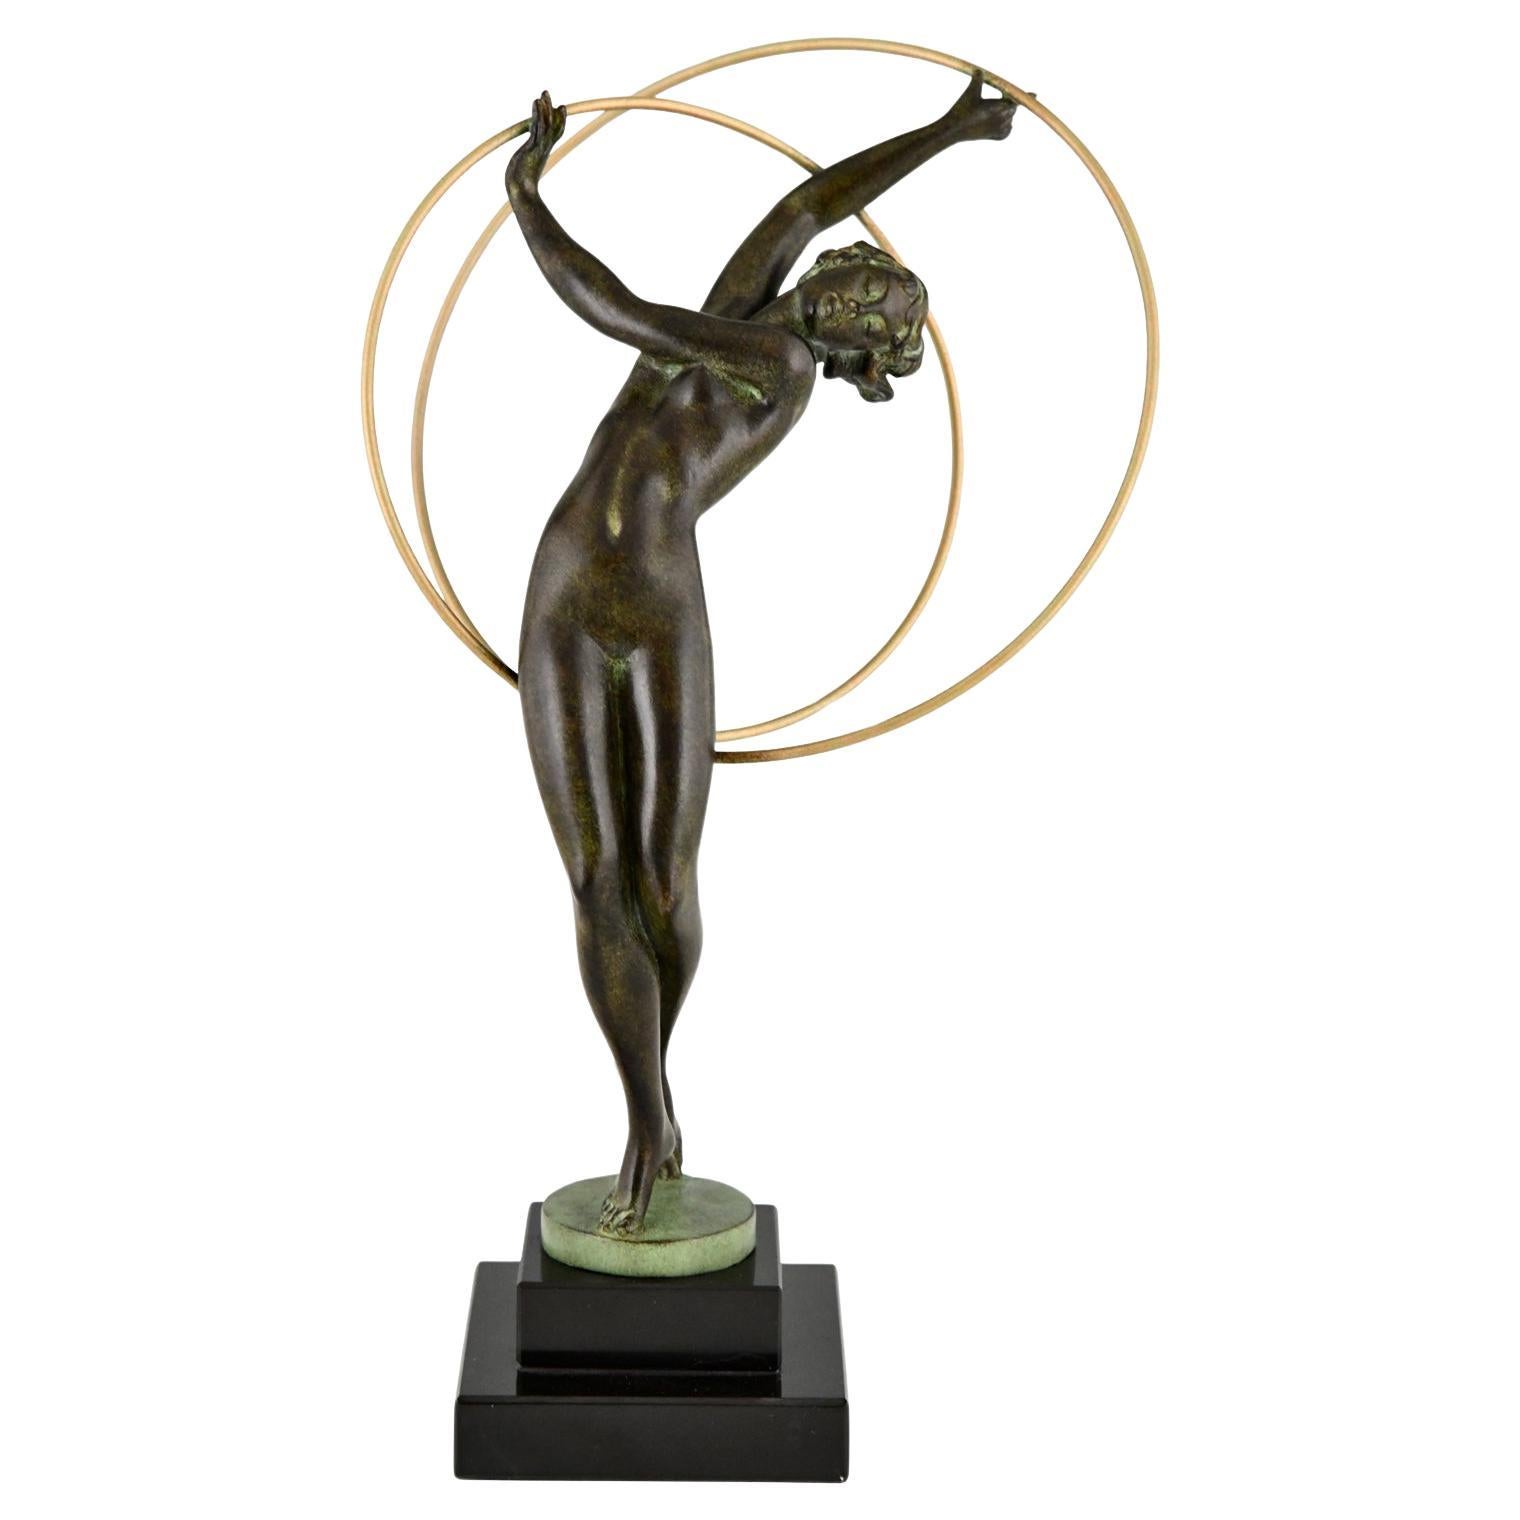 Art Deco style Sculpture Nude Hoop Dancer ILLUSION by Fayral for Max Le Verrier